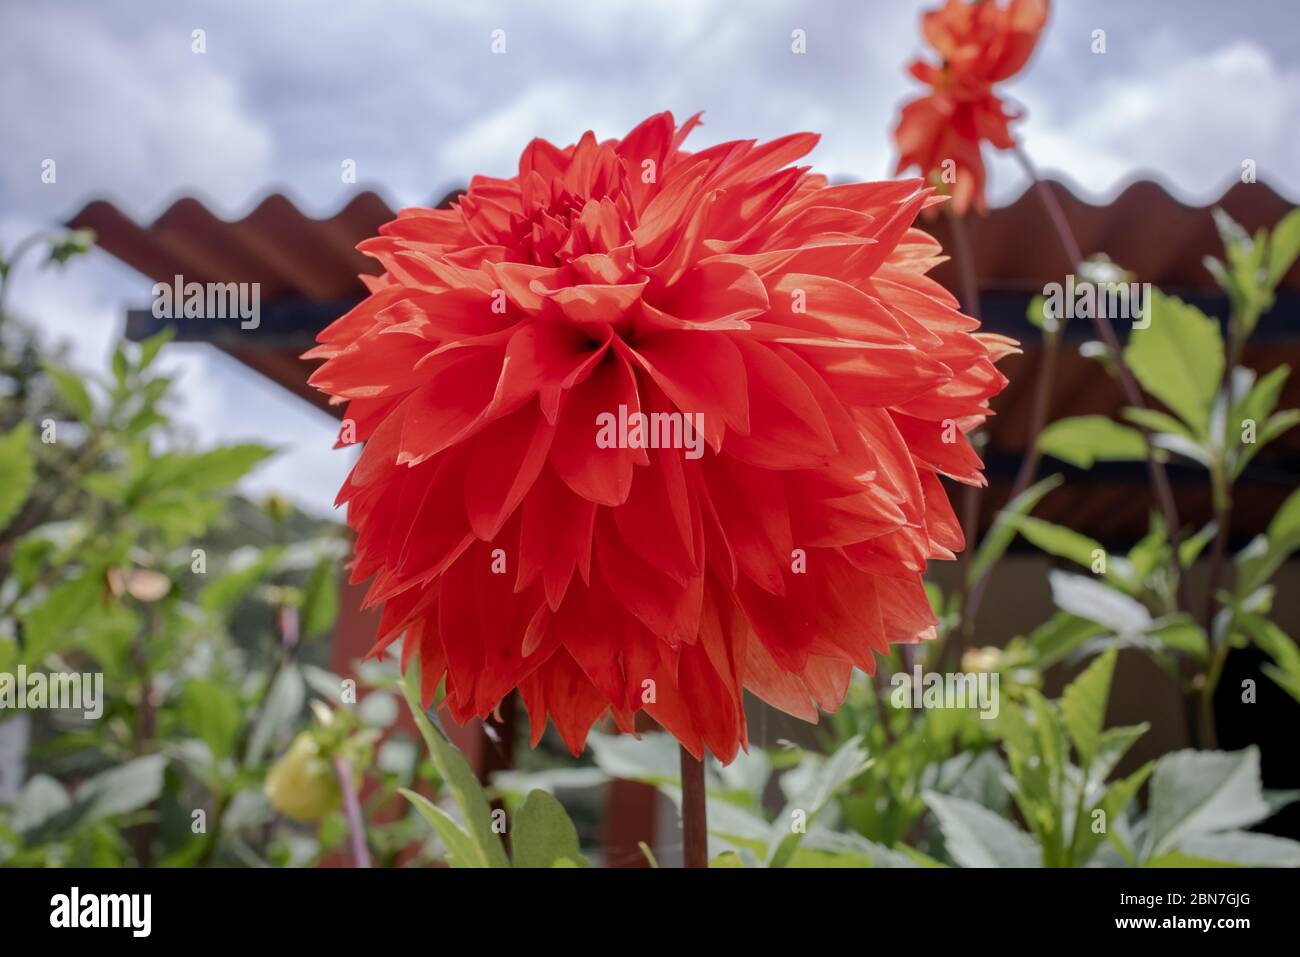 Large red flower named Dahlia, of the botanical genus belonging to the Asteraceae family, in garden, Areal, Rio de Janeiro, Brazil Stock Photo